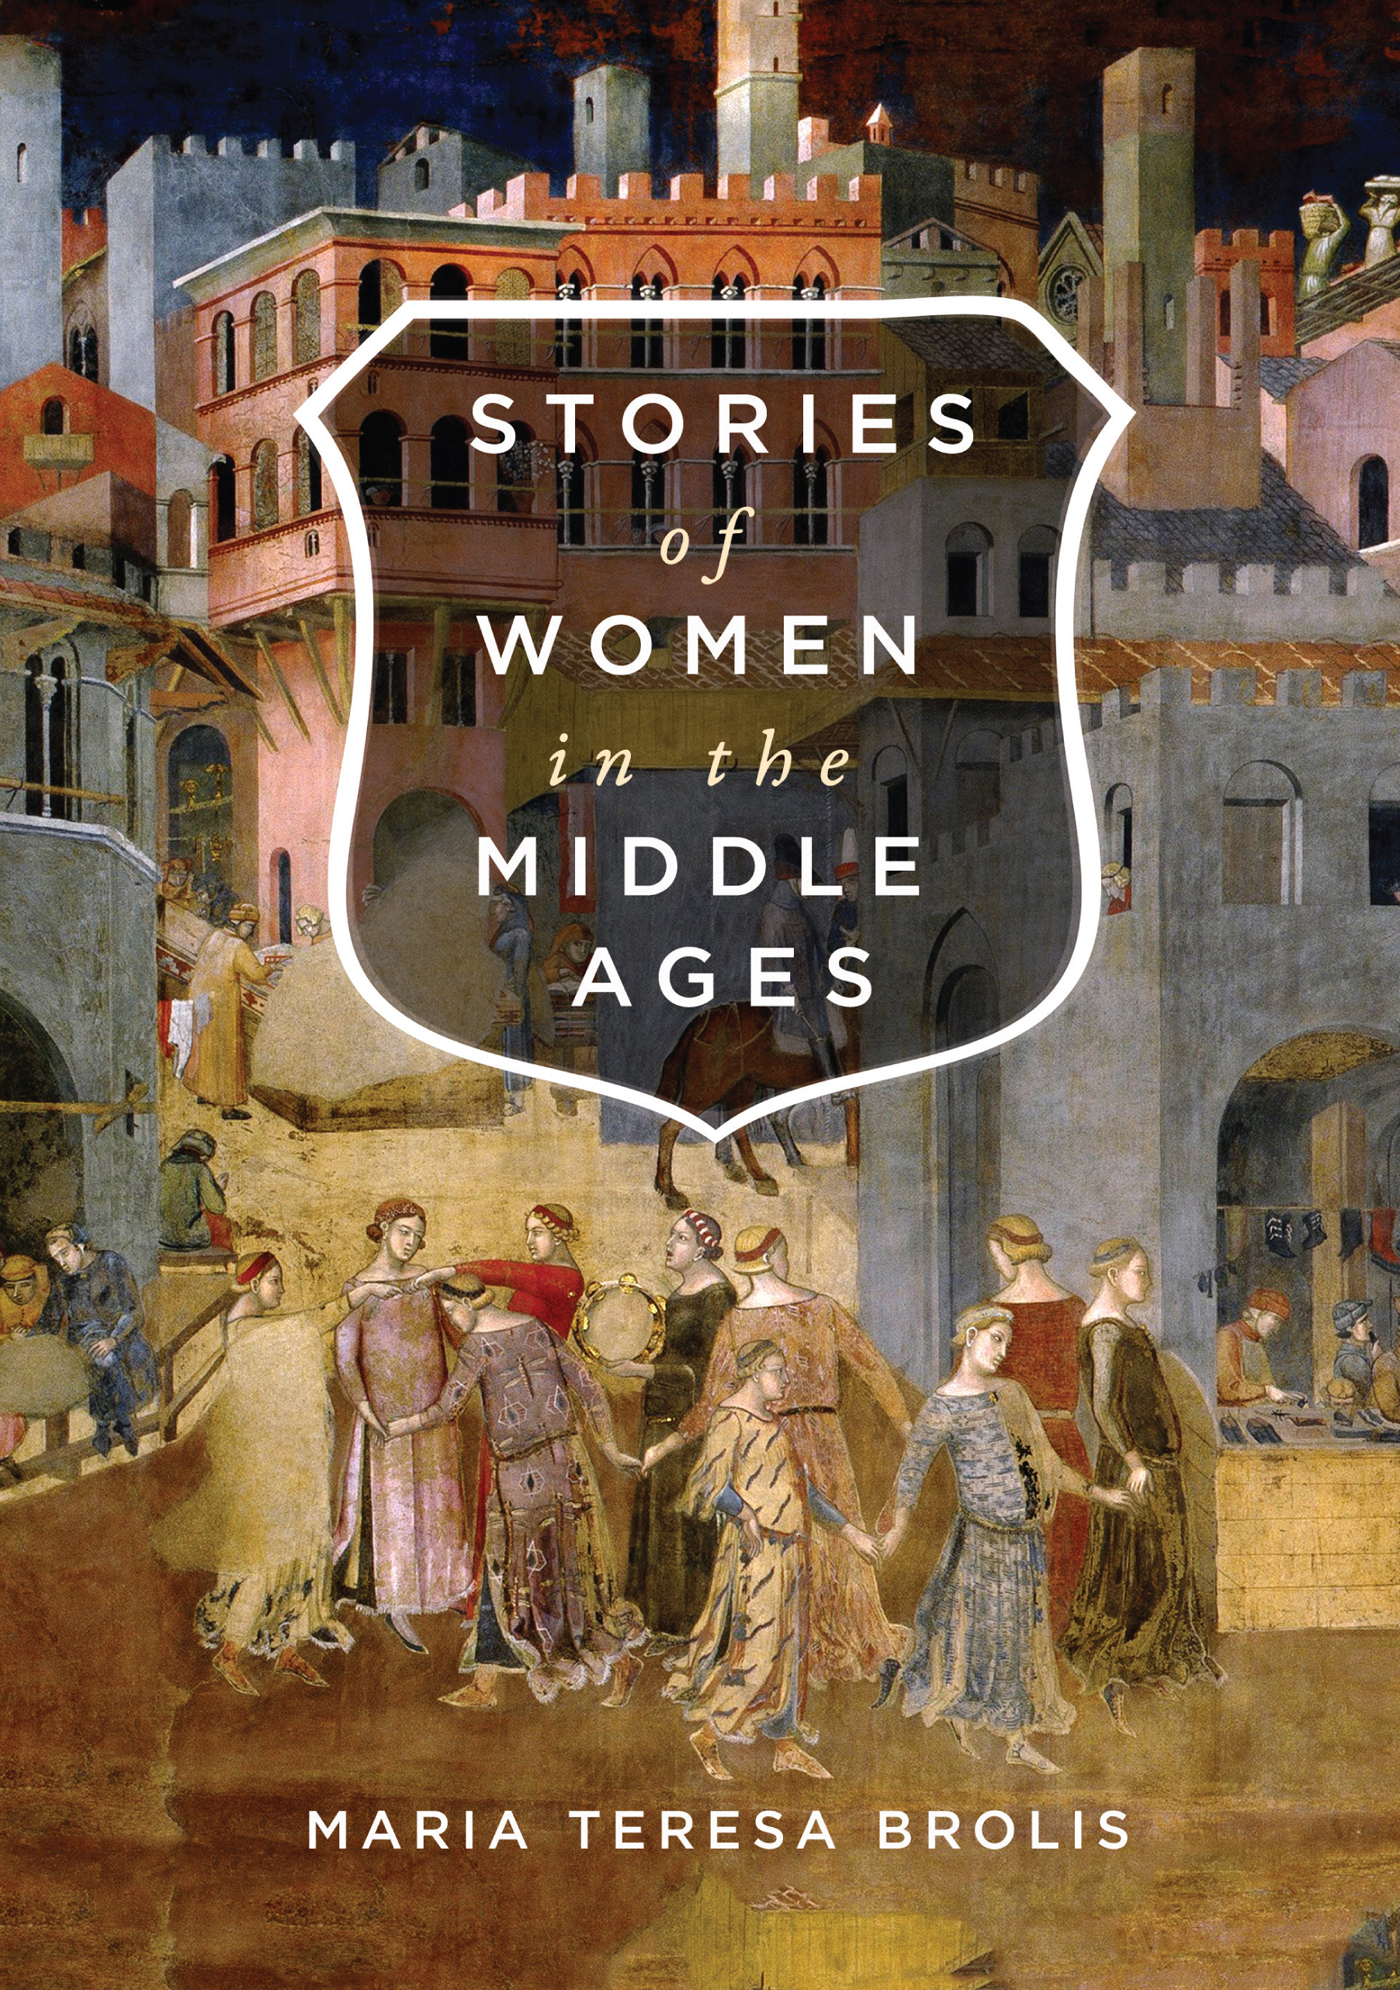 STORIES OF WOMEN IN THE MIDDLE AGES Maria Teresa Brolis STORIES of WOMEN in - photo 1